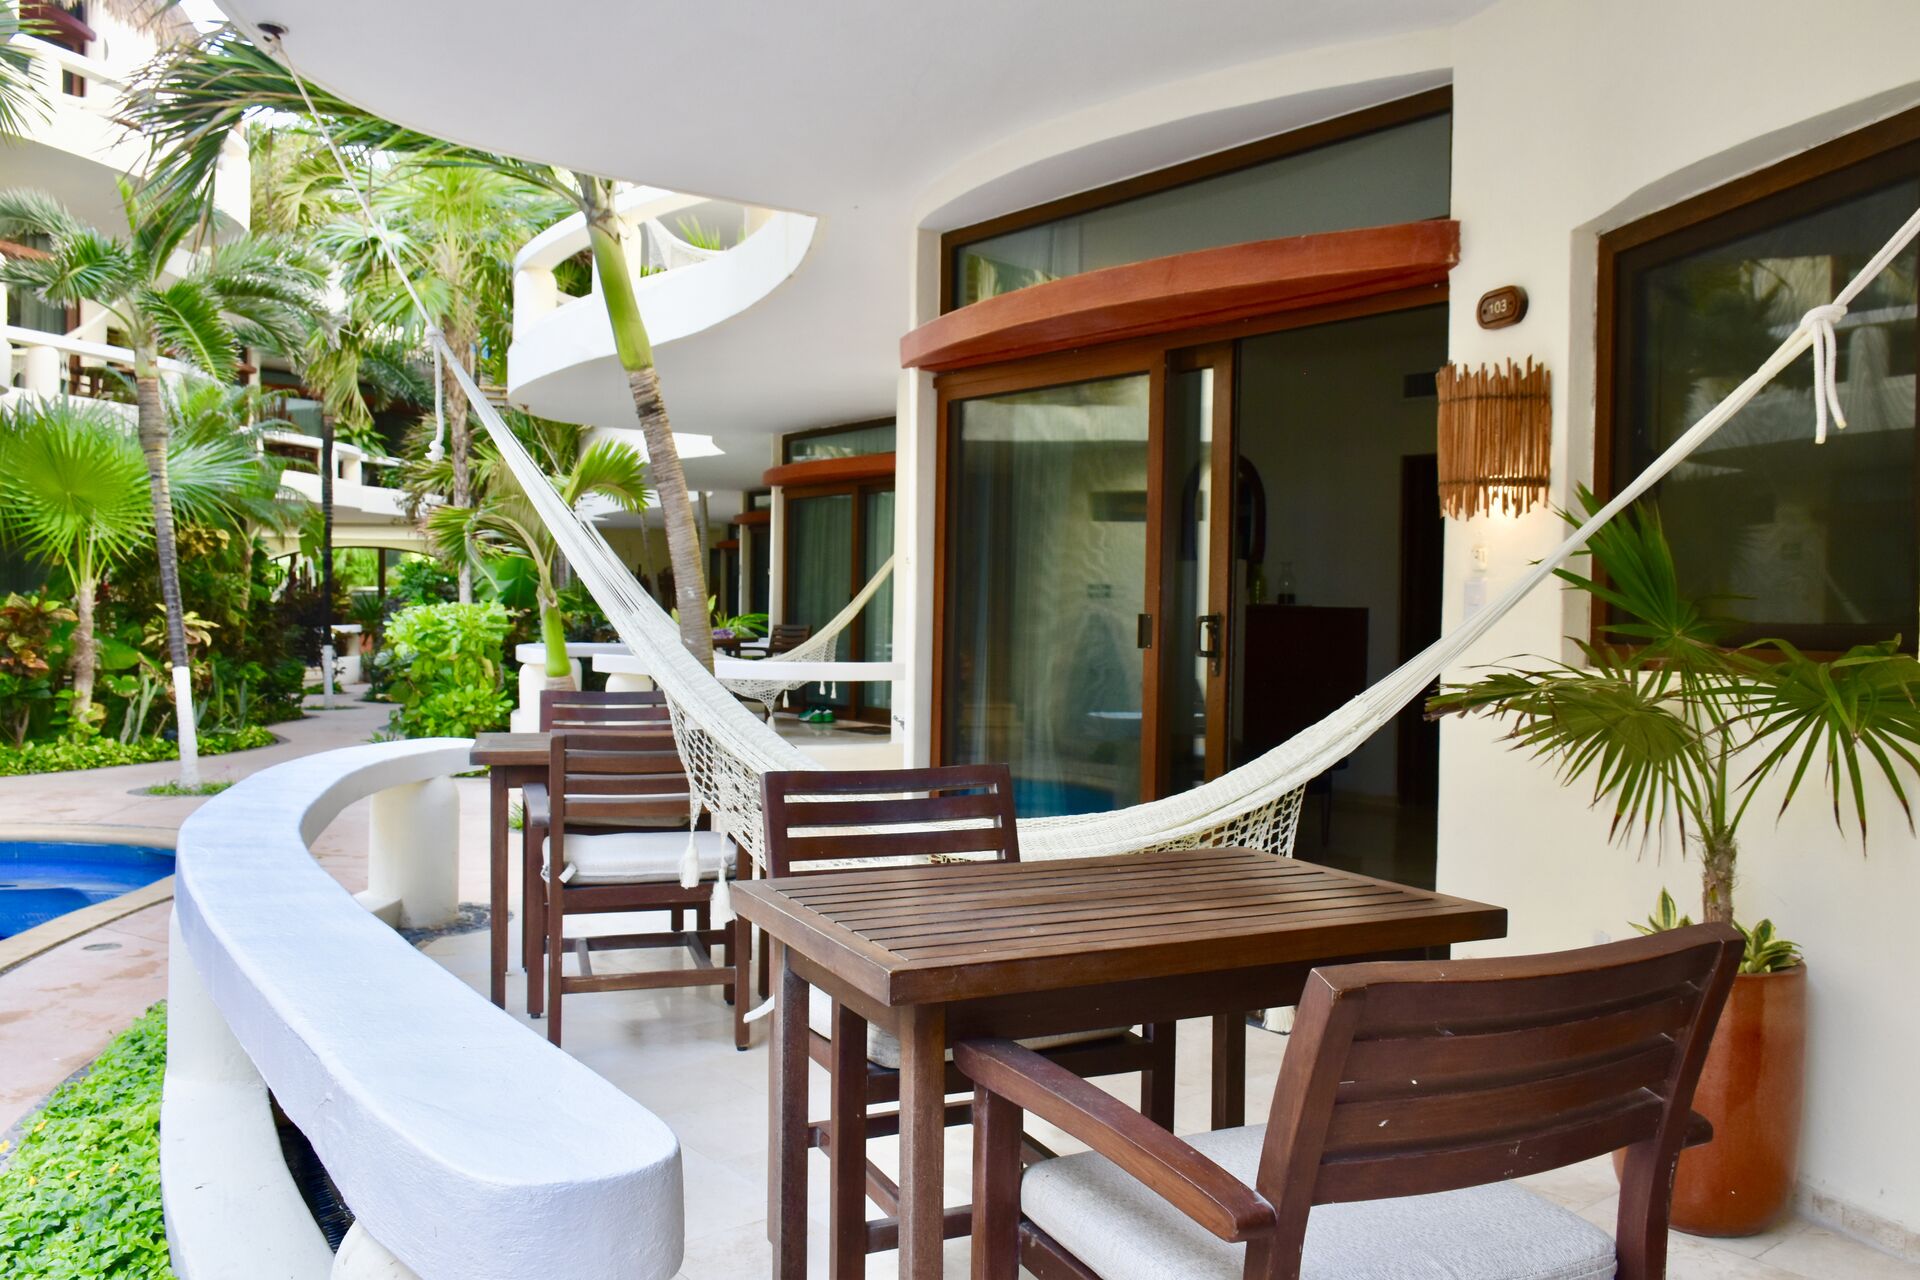 Balcony with chairs and hammock.